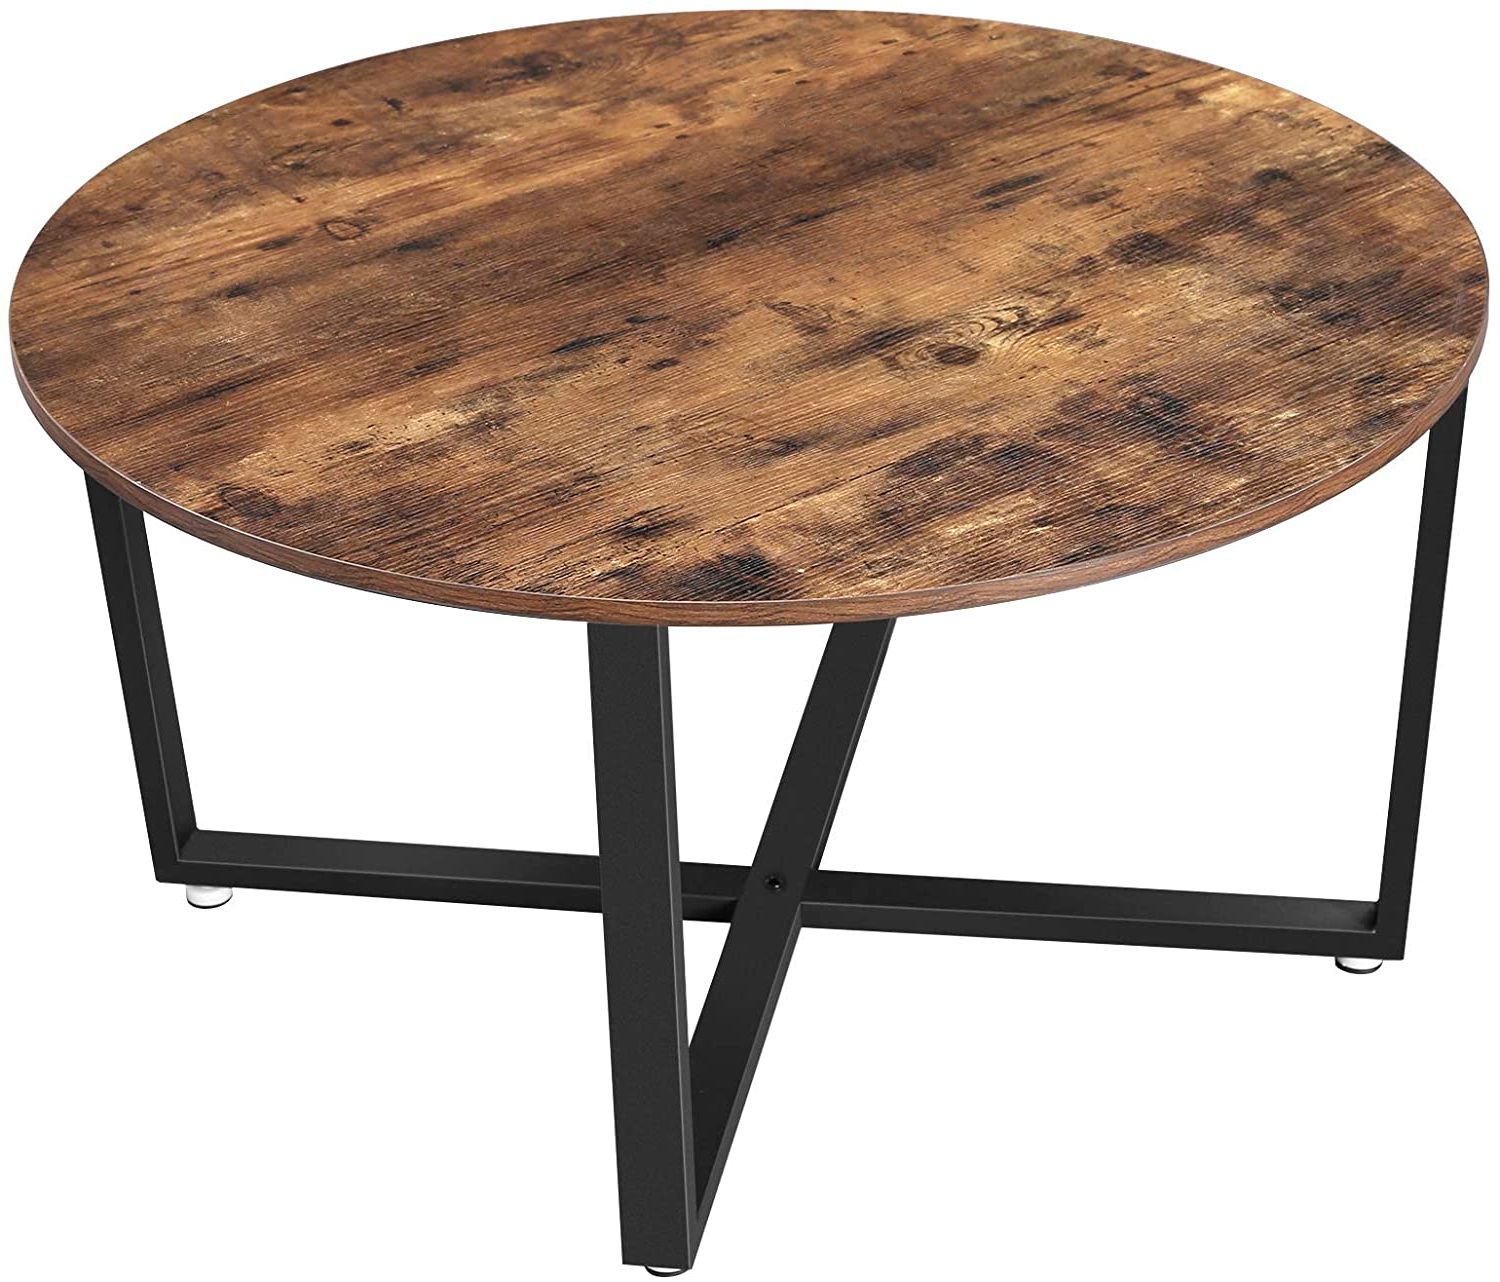 Popular Round Industrial Coffee Tables Regarding Round Coffee Table Industrial Style Cocktail Table,durable Metal Frame,easy  To Assemble For Living Room,rustic Brown – Buy Modern Drum Style Coffee  Table,circular Shape Coffee Table,living Room Wood Coffee Tables Product On  Alibaba (View 5 of 20)